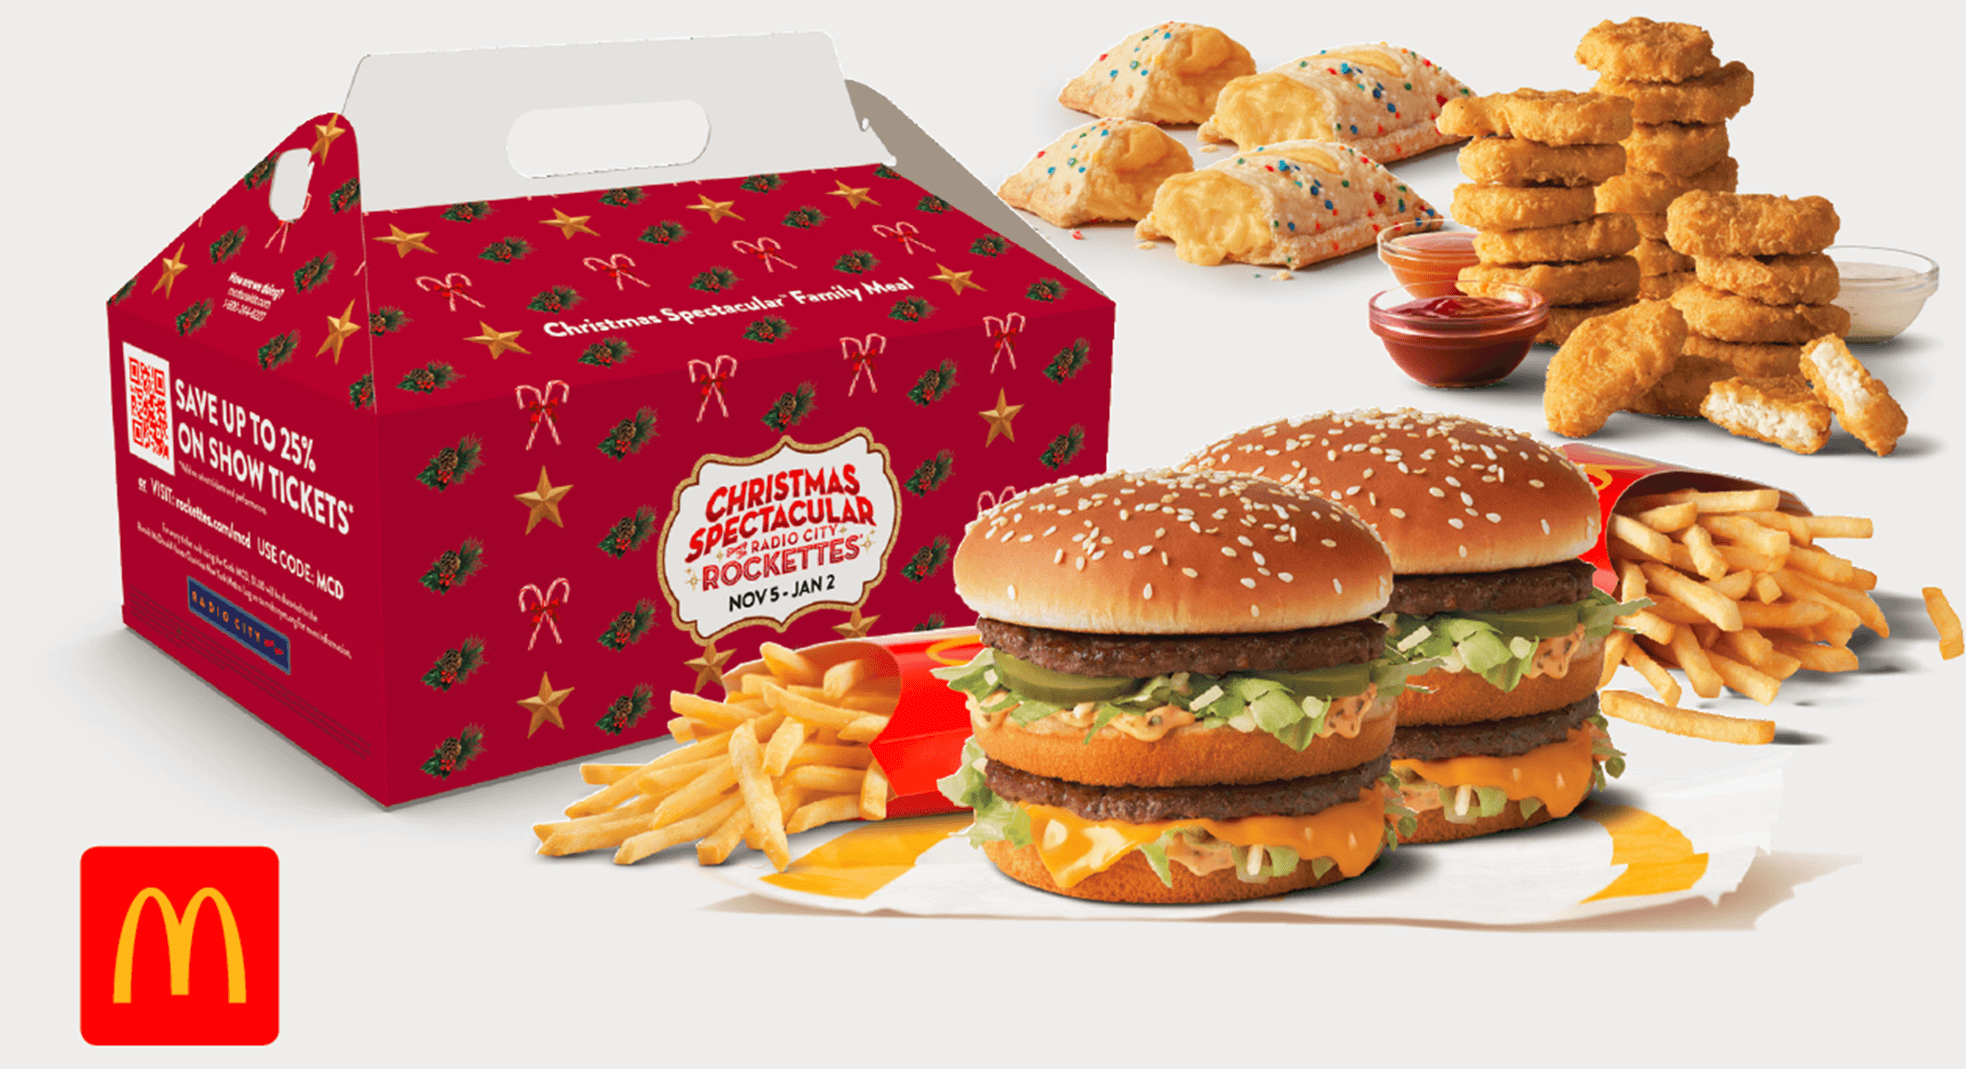 McDonald’s partners with Christmas Spectacular to support Ronald